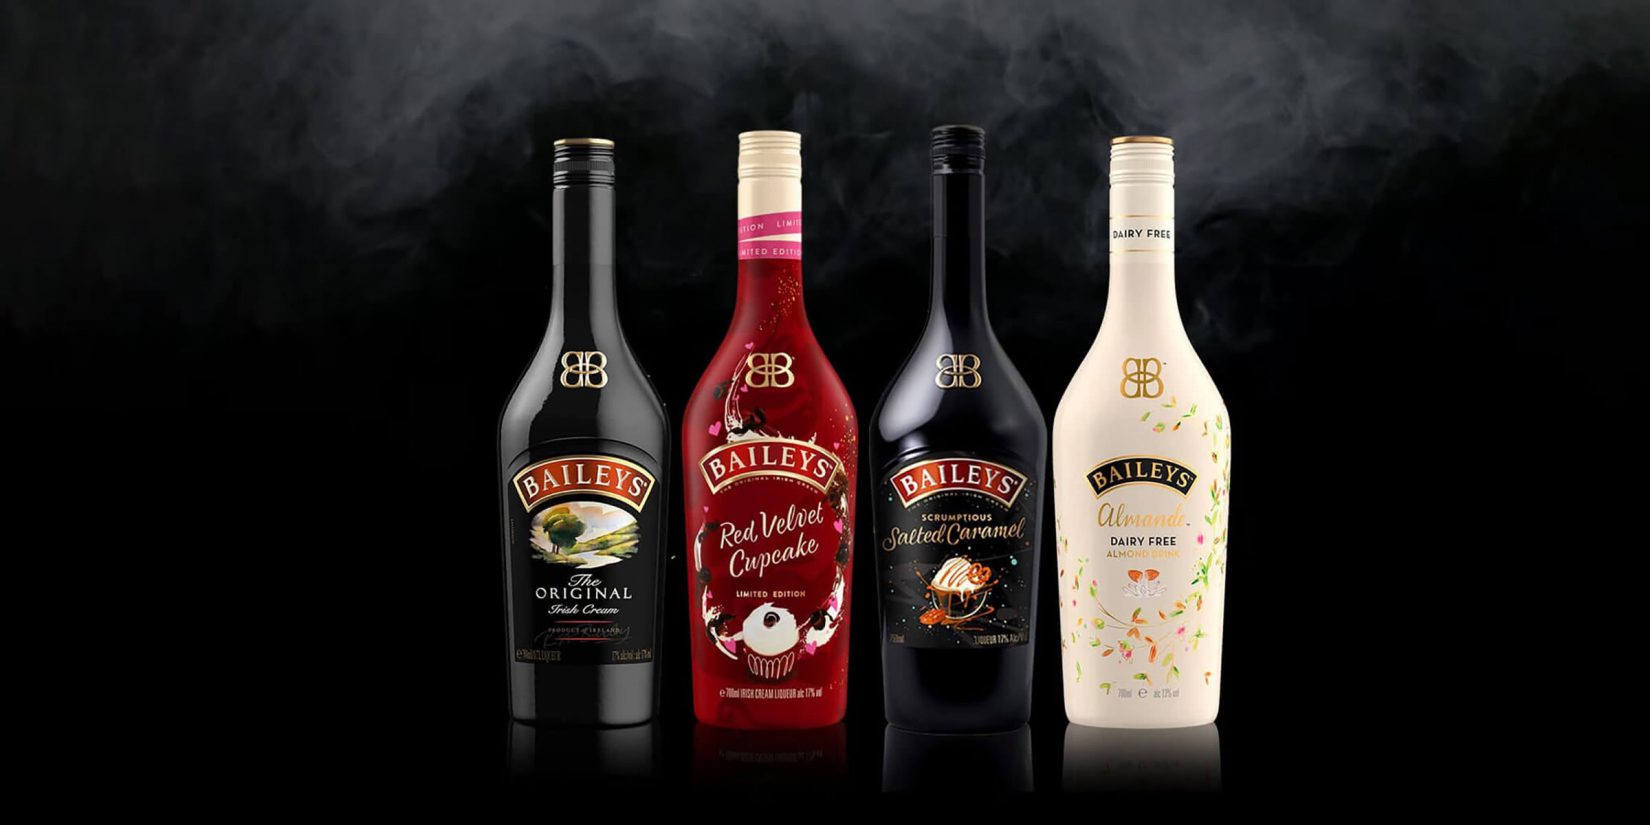 baileys-price-guide-find-the-perfect-bottle-of-cream-liqueur-2021